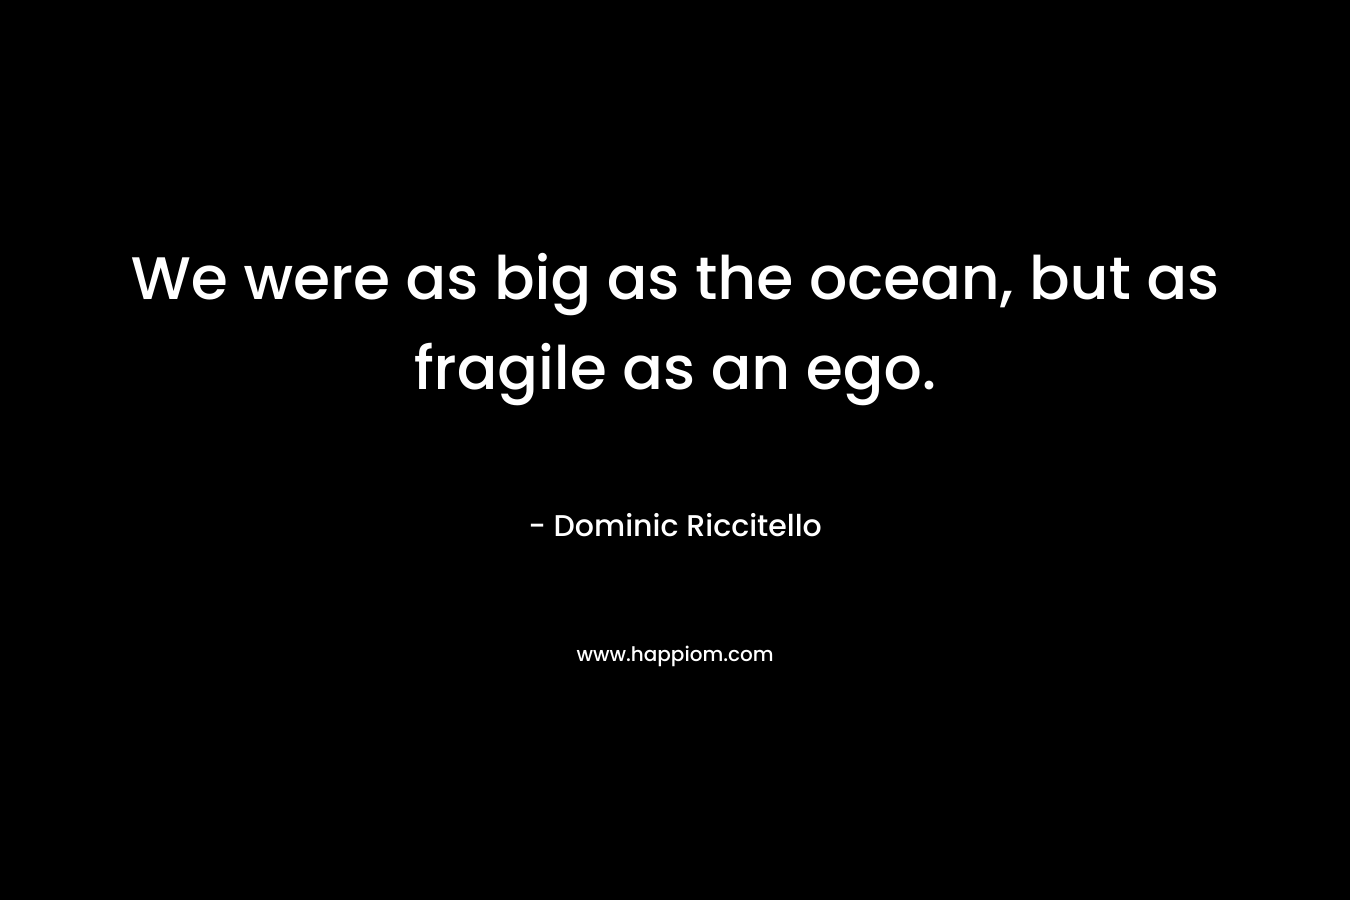 We were as big as the ocean, but as fragile as an ego.